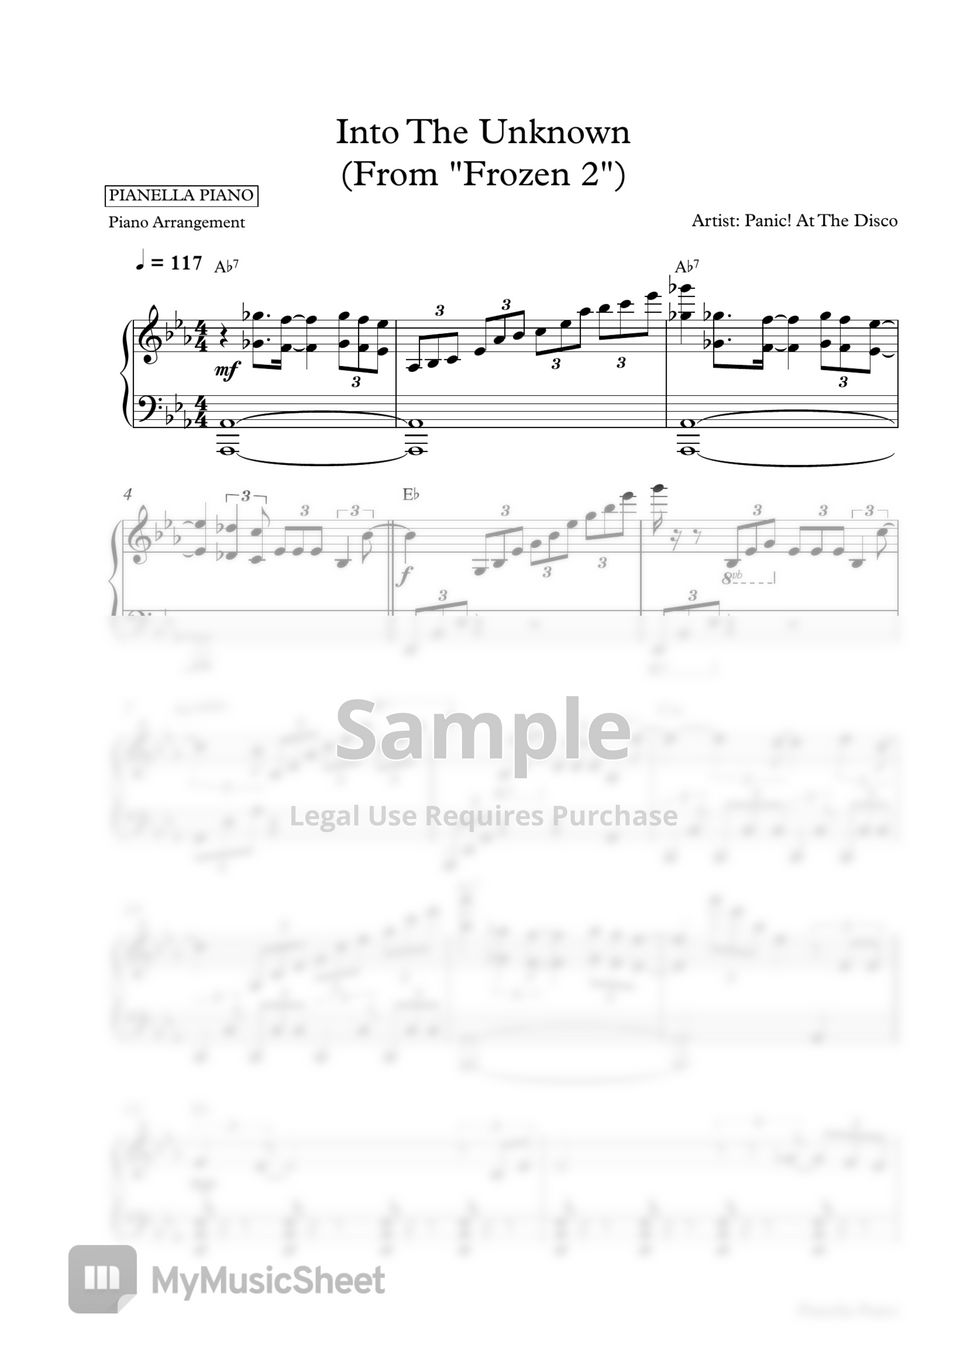 Panic! At The Disco - Into The Unknown (From FROZEN 2) (Piano Sheet) by Pianella Piano